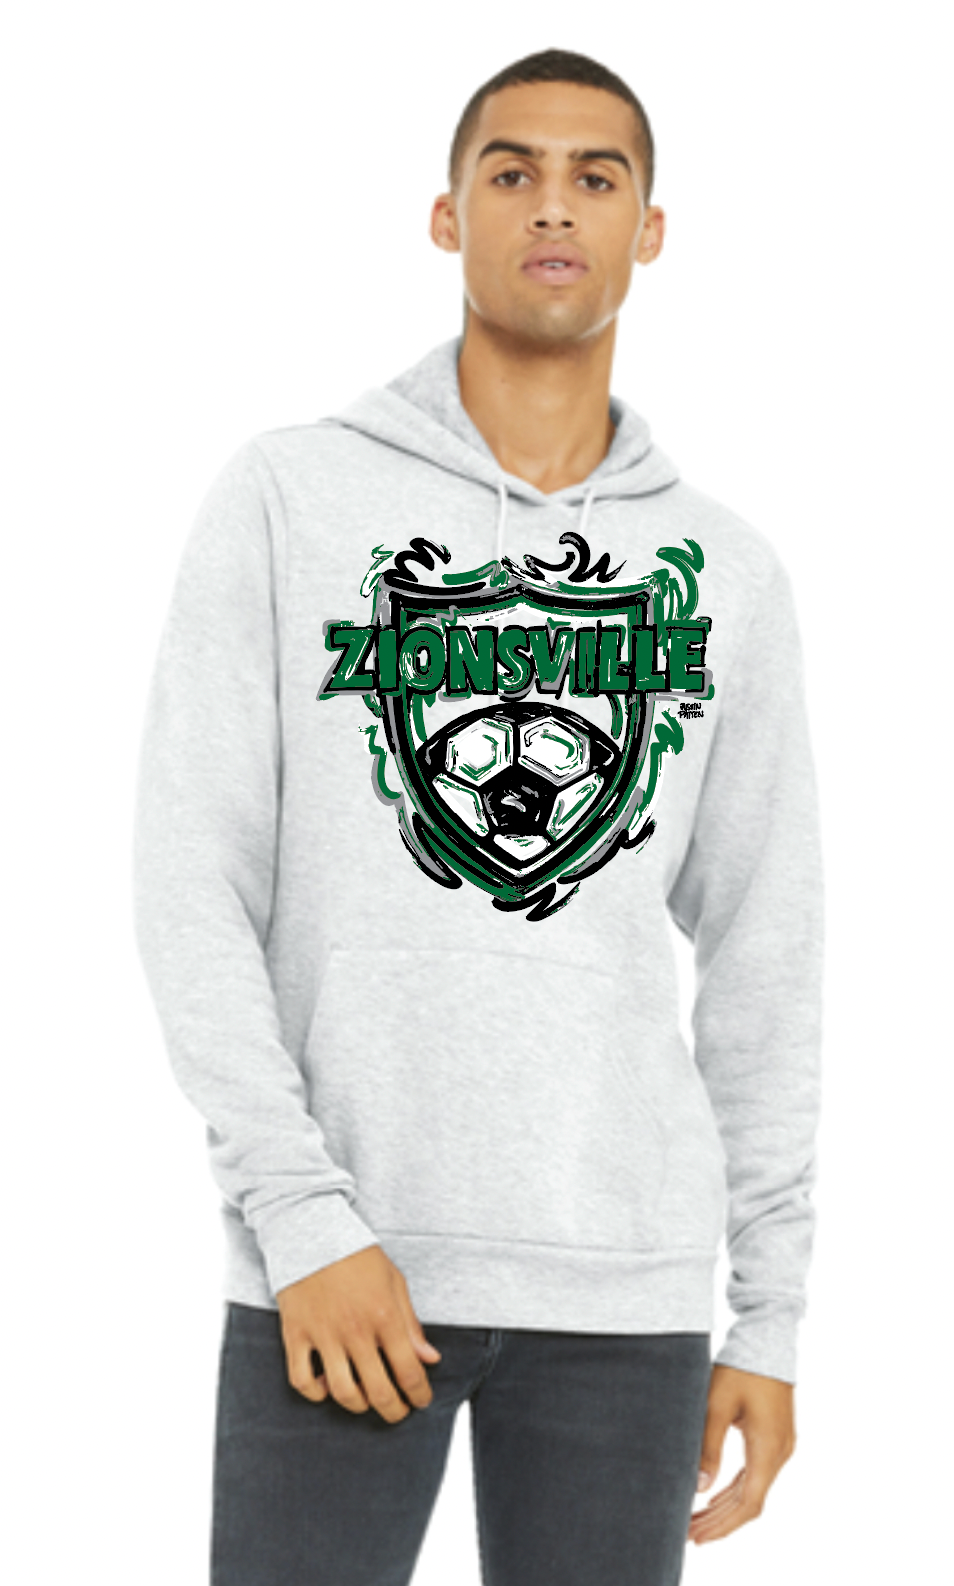 Zionsville Soccer Unisex Hoodie by Justin Patten (1 Color)